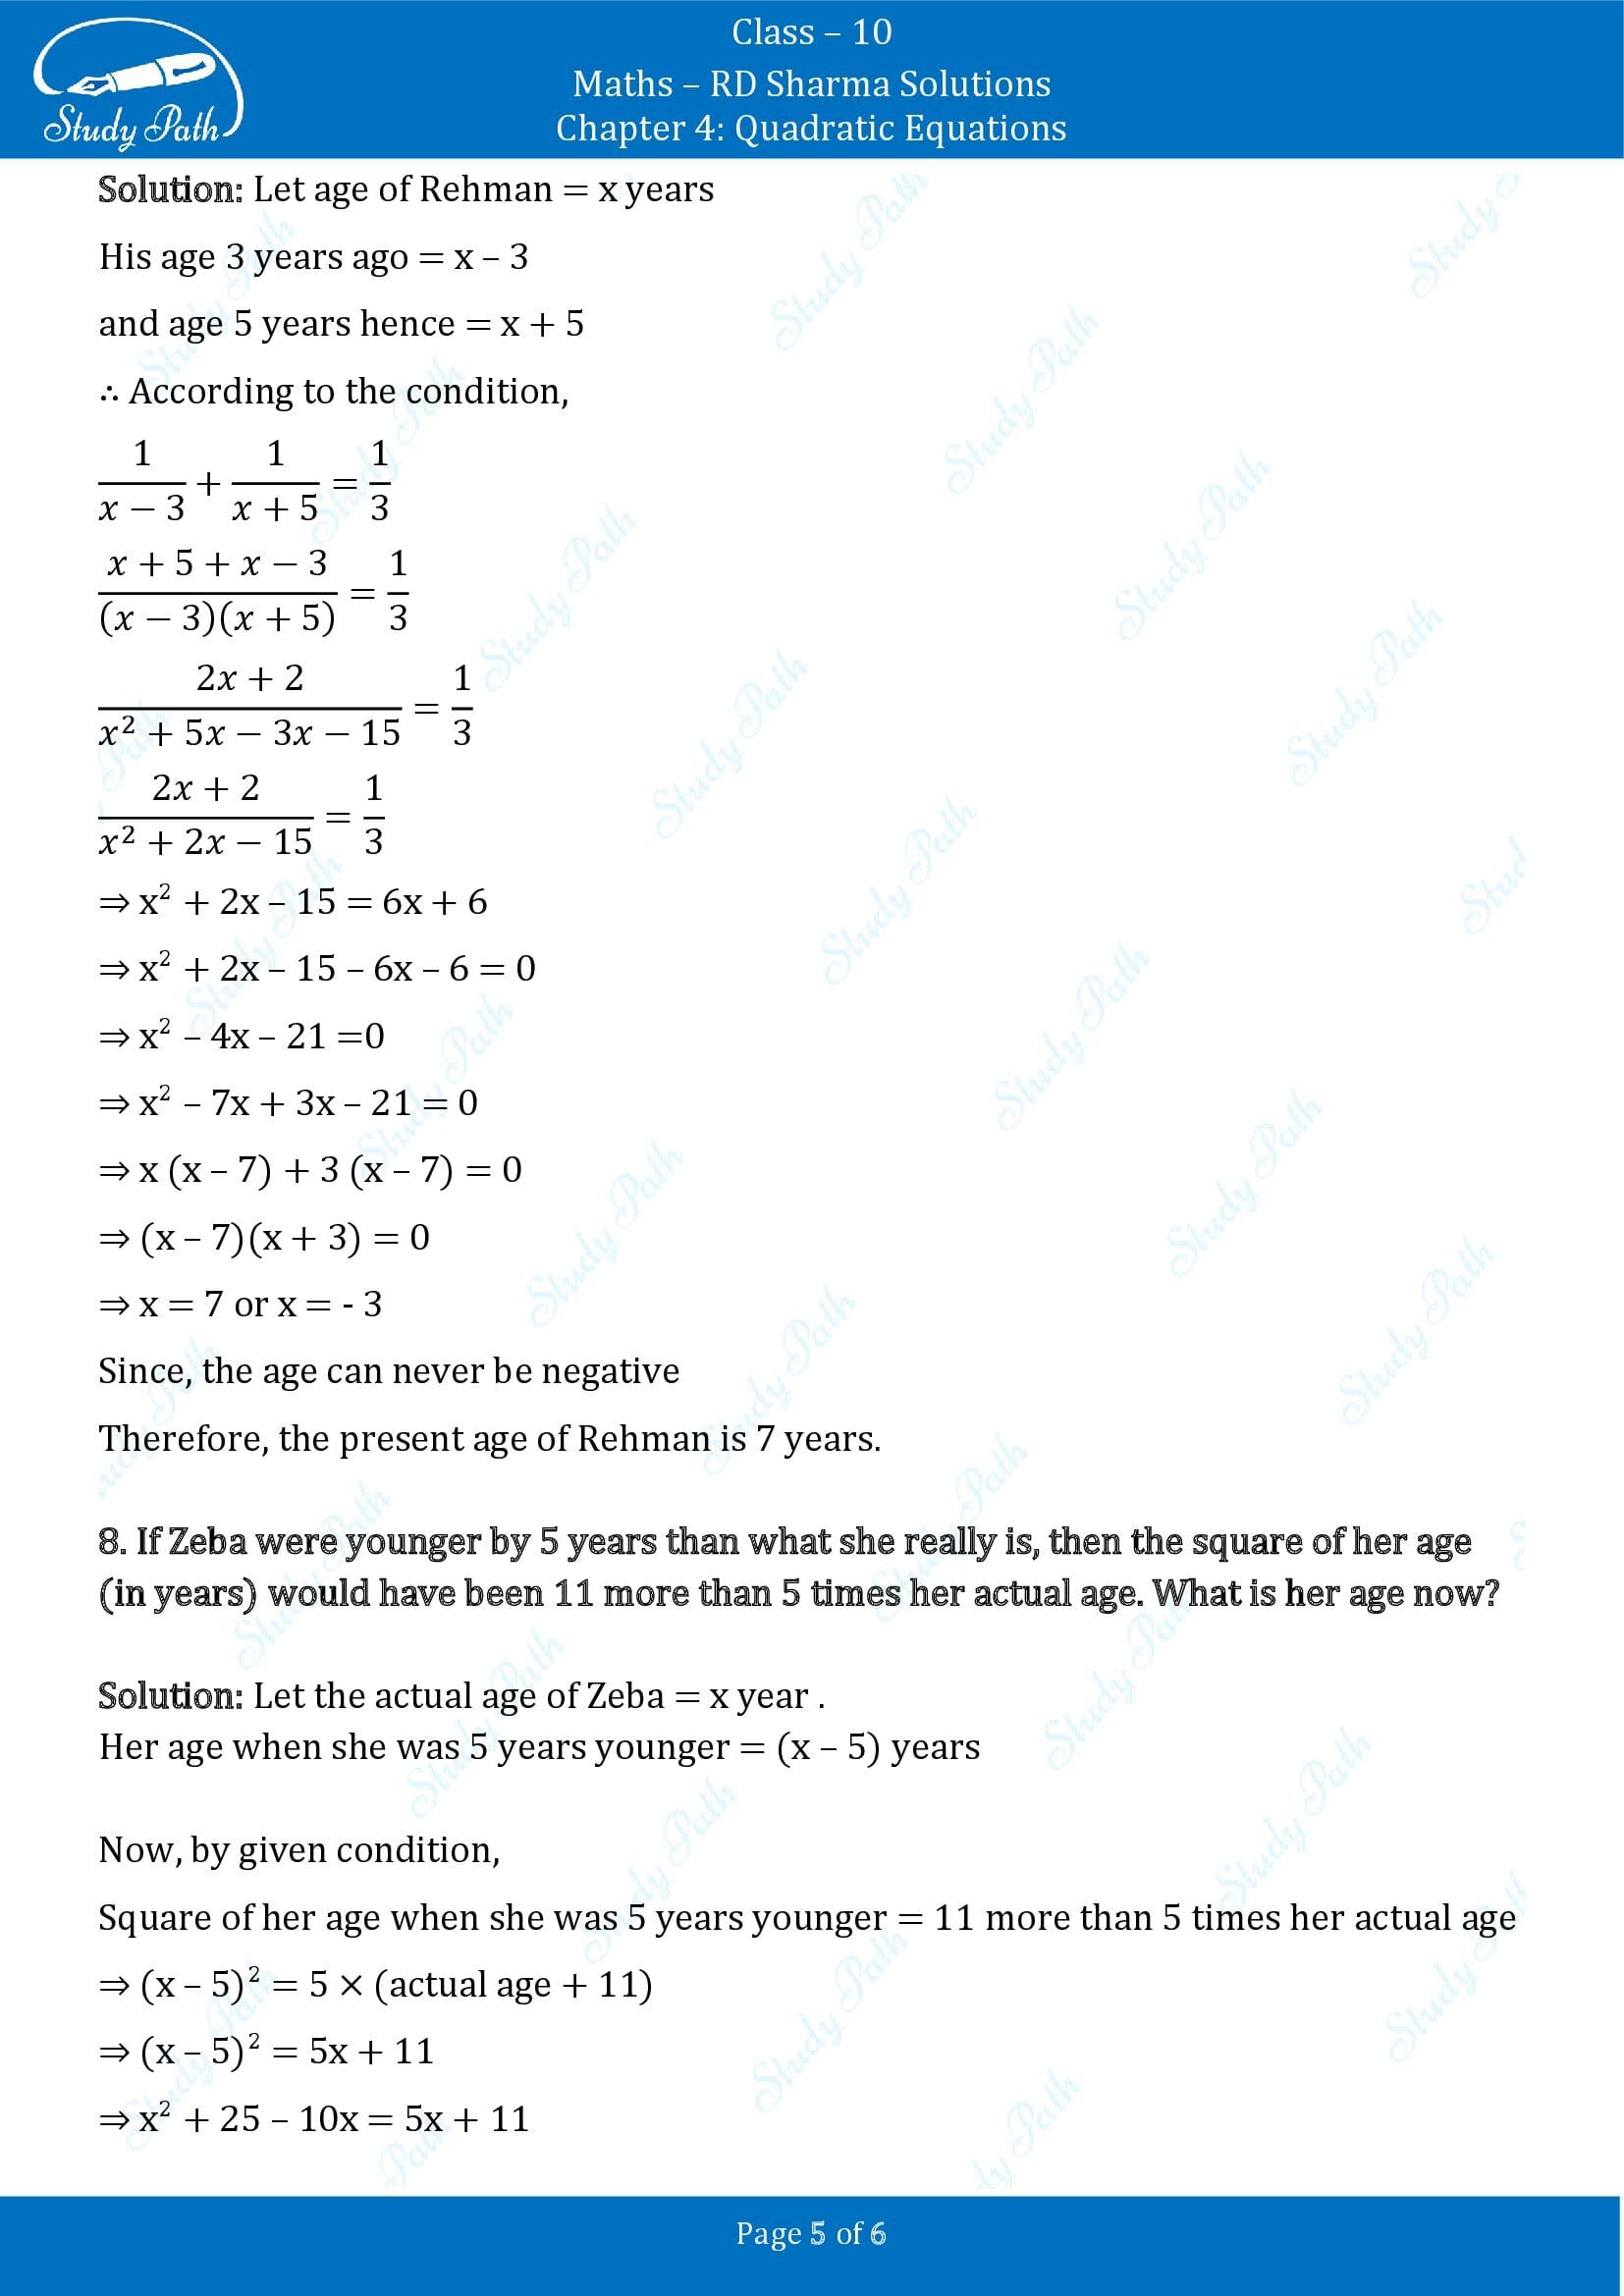 RD Sharma Solutions Class 10 Chapter 4 Quadratic Equations Exercise 4.9 00005